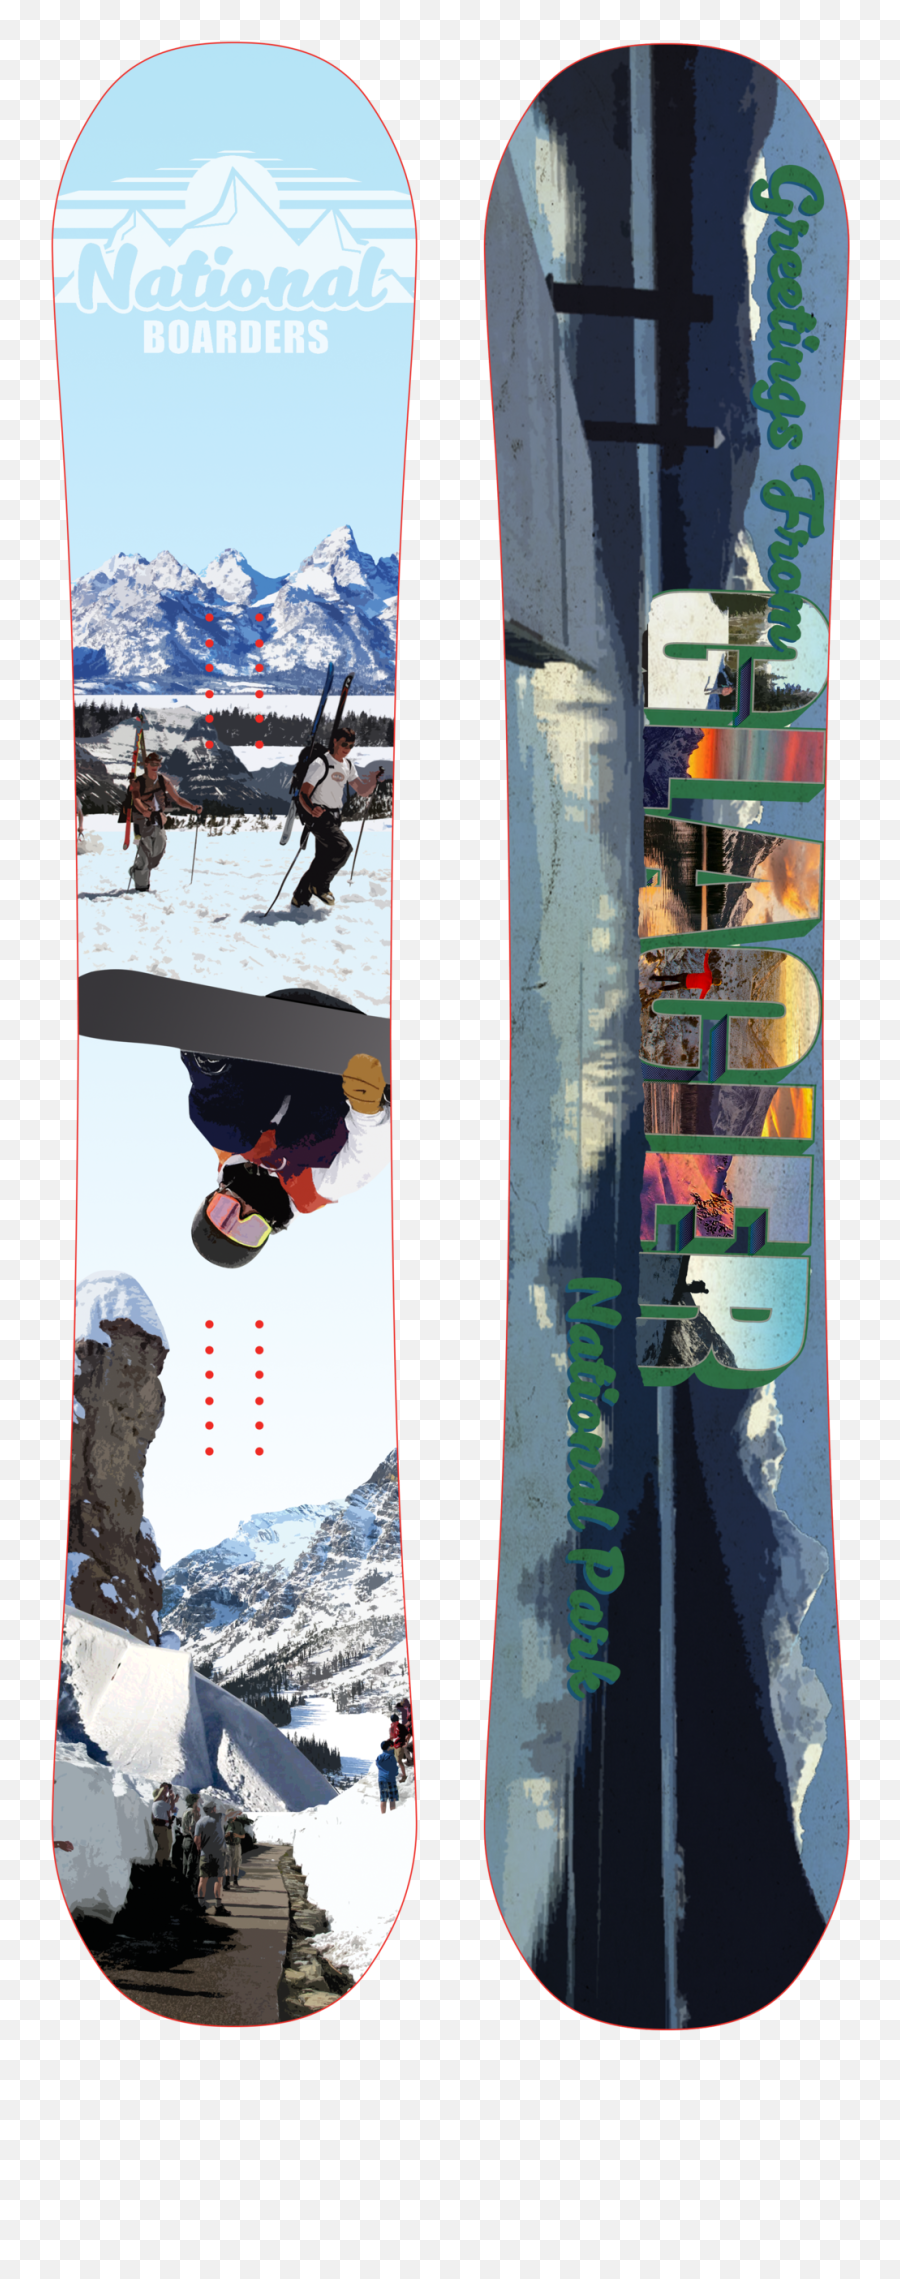 Boarders Png - Glacierboards Web 4368989 Vippng Snowboarding,Boarders Png